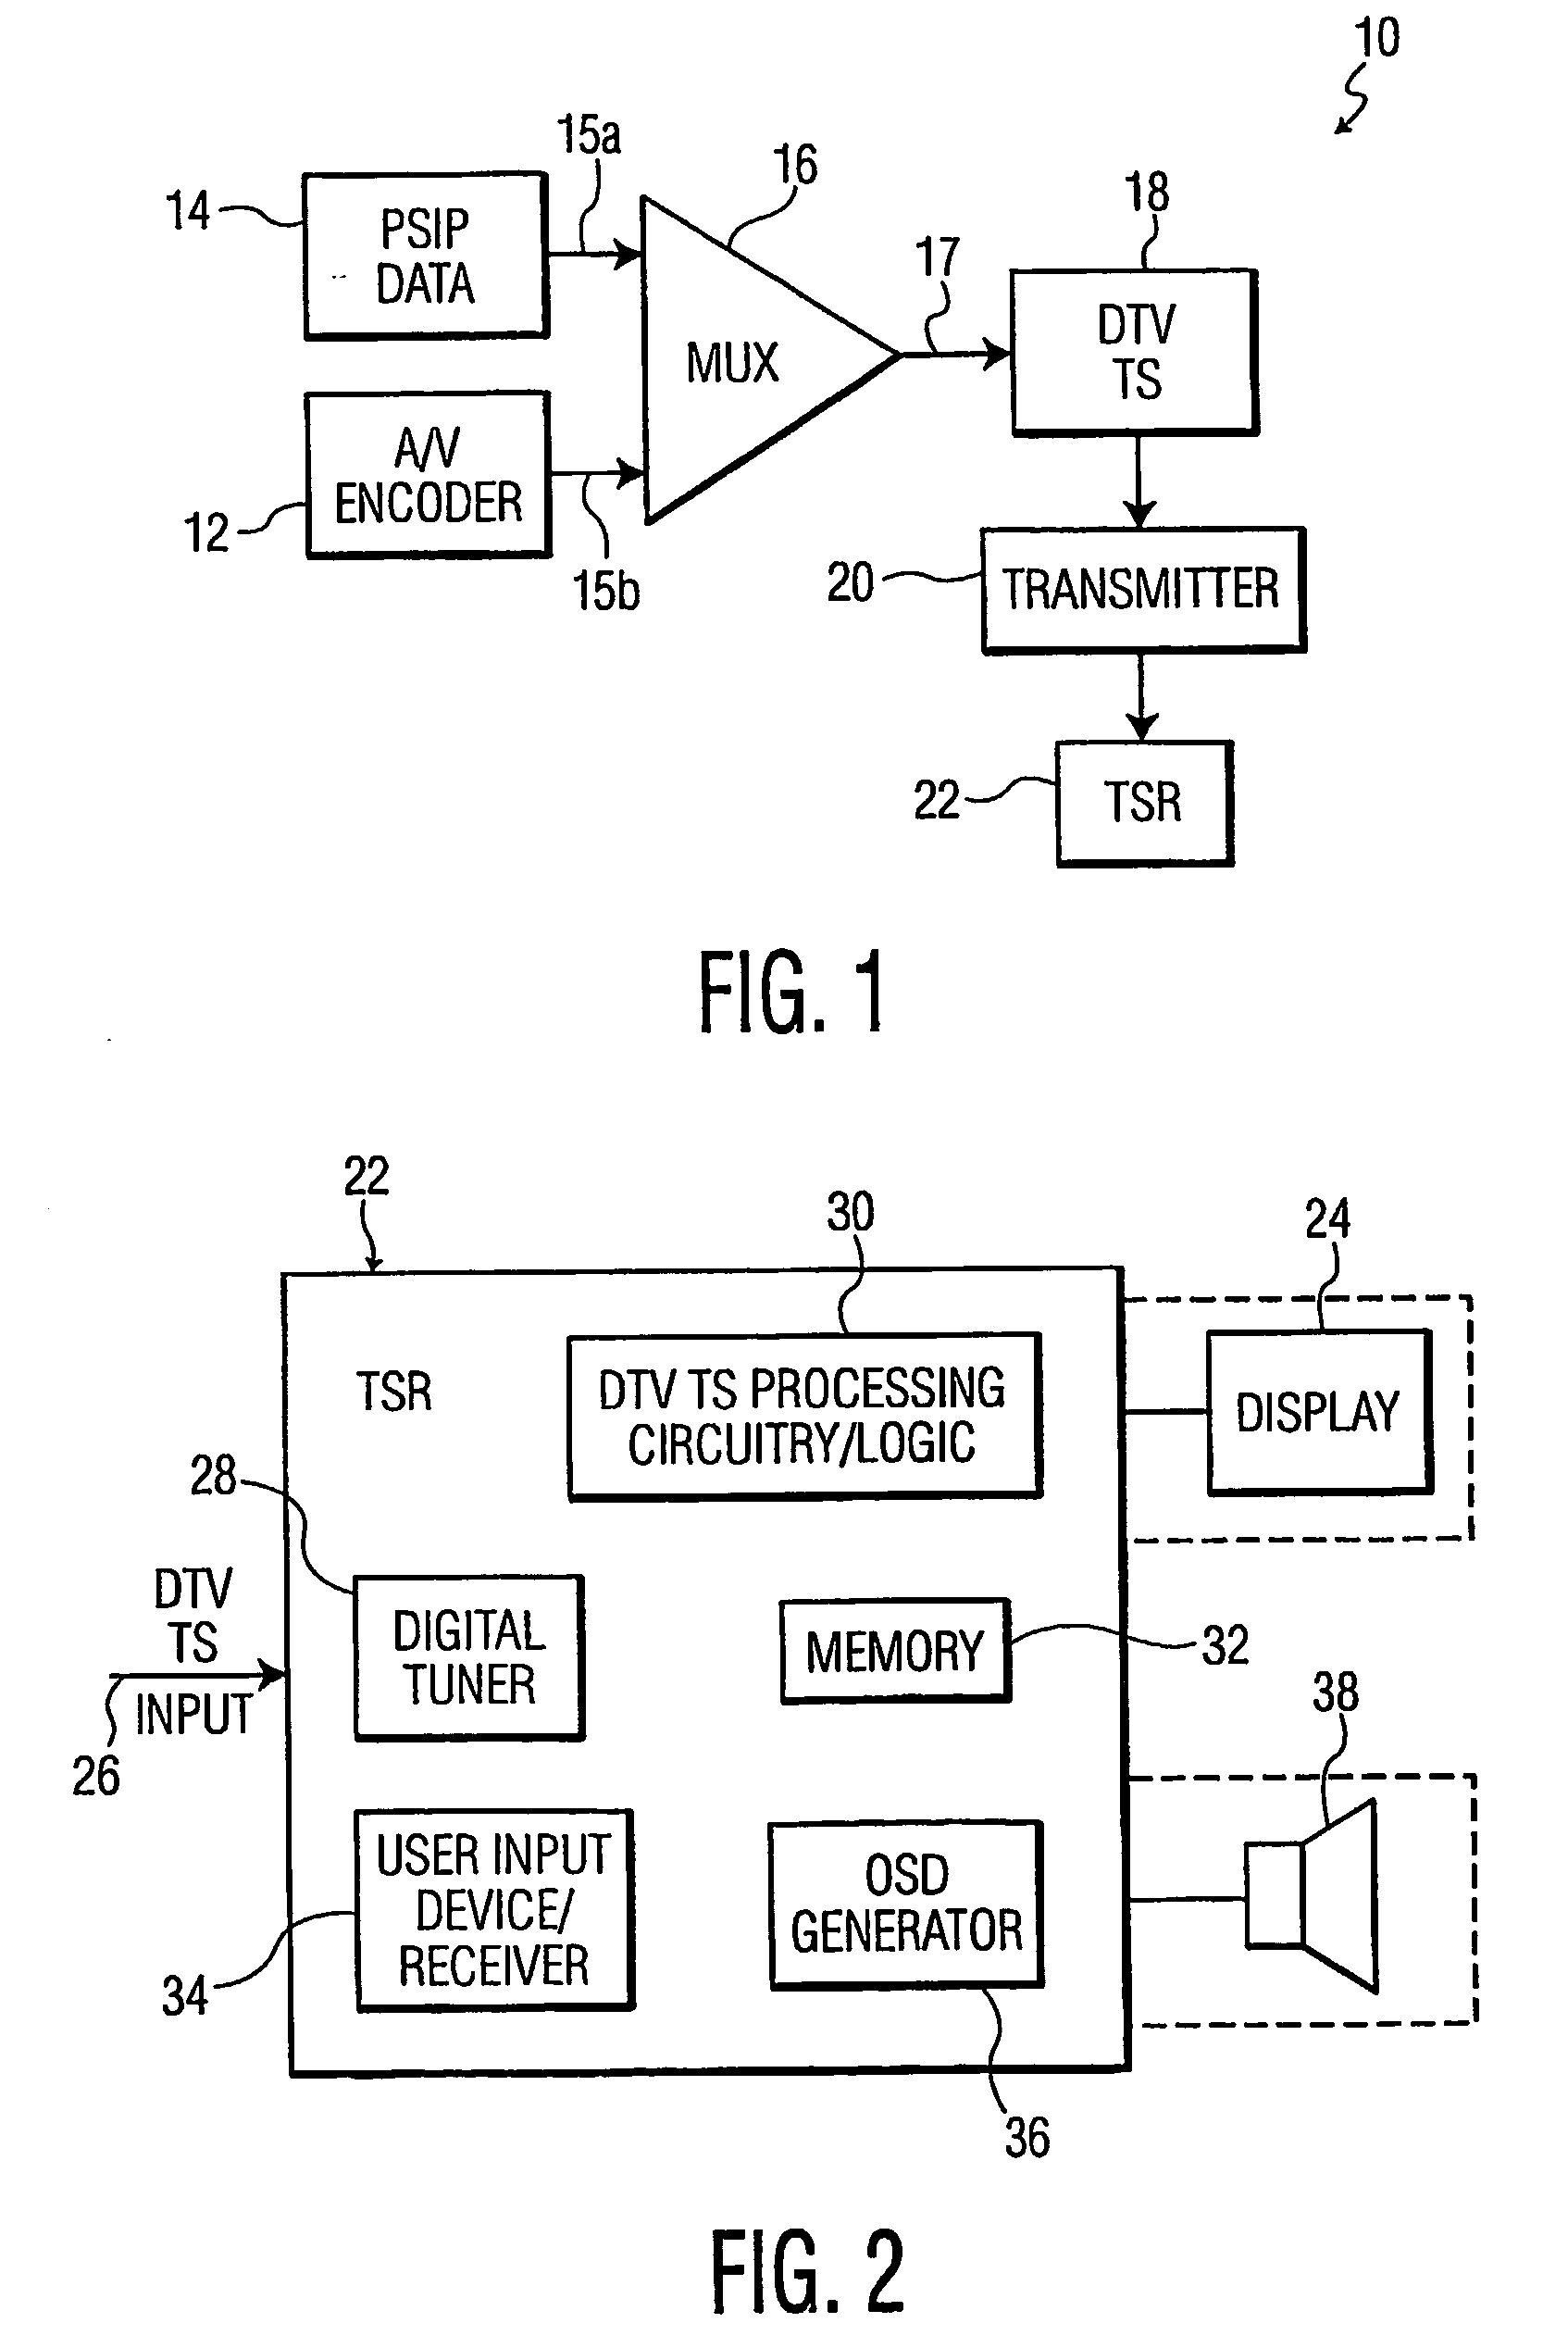 Automatic signal error display and user guided signal recovery in a digital television signal receiver